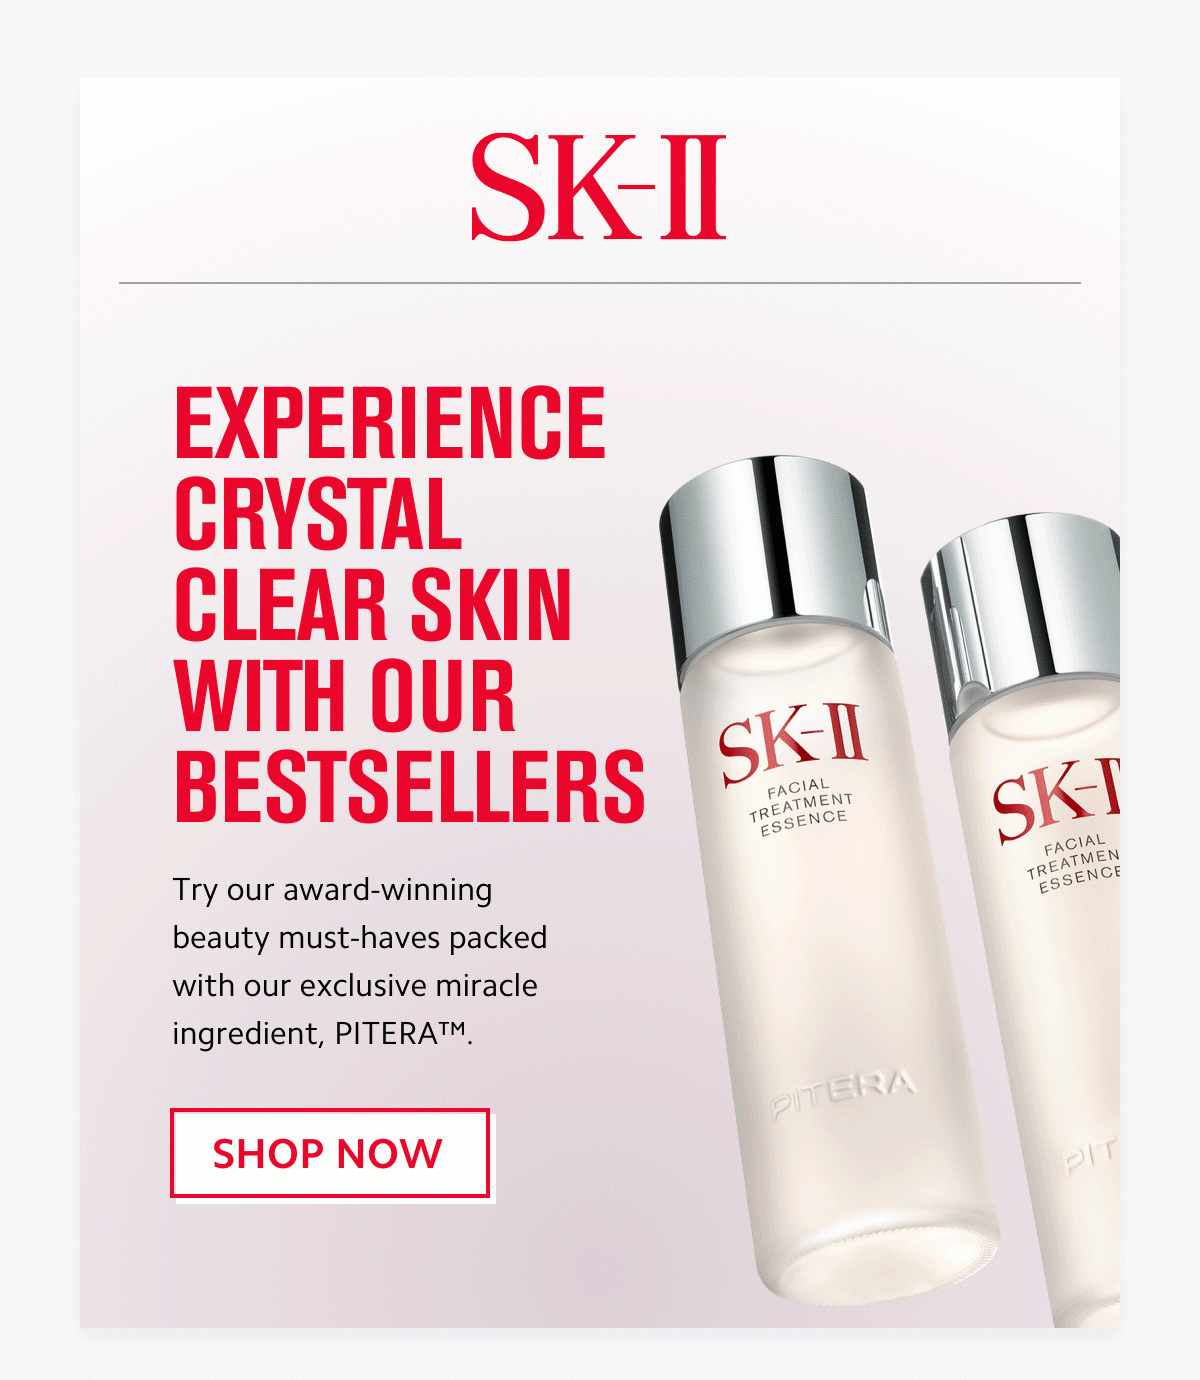 EXPERIENCE CRYSTAL CLEAR SKIN WITH OUR BESTSELLERS - SHOP NOW